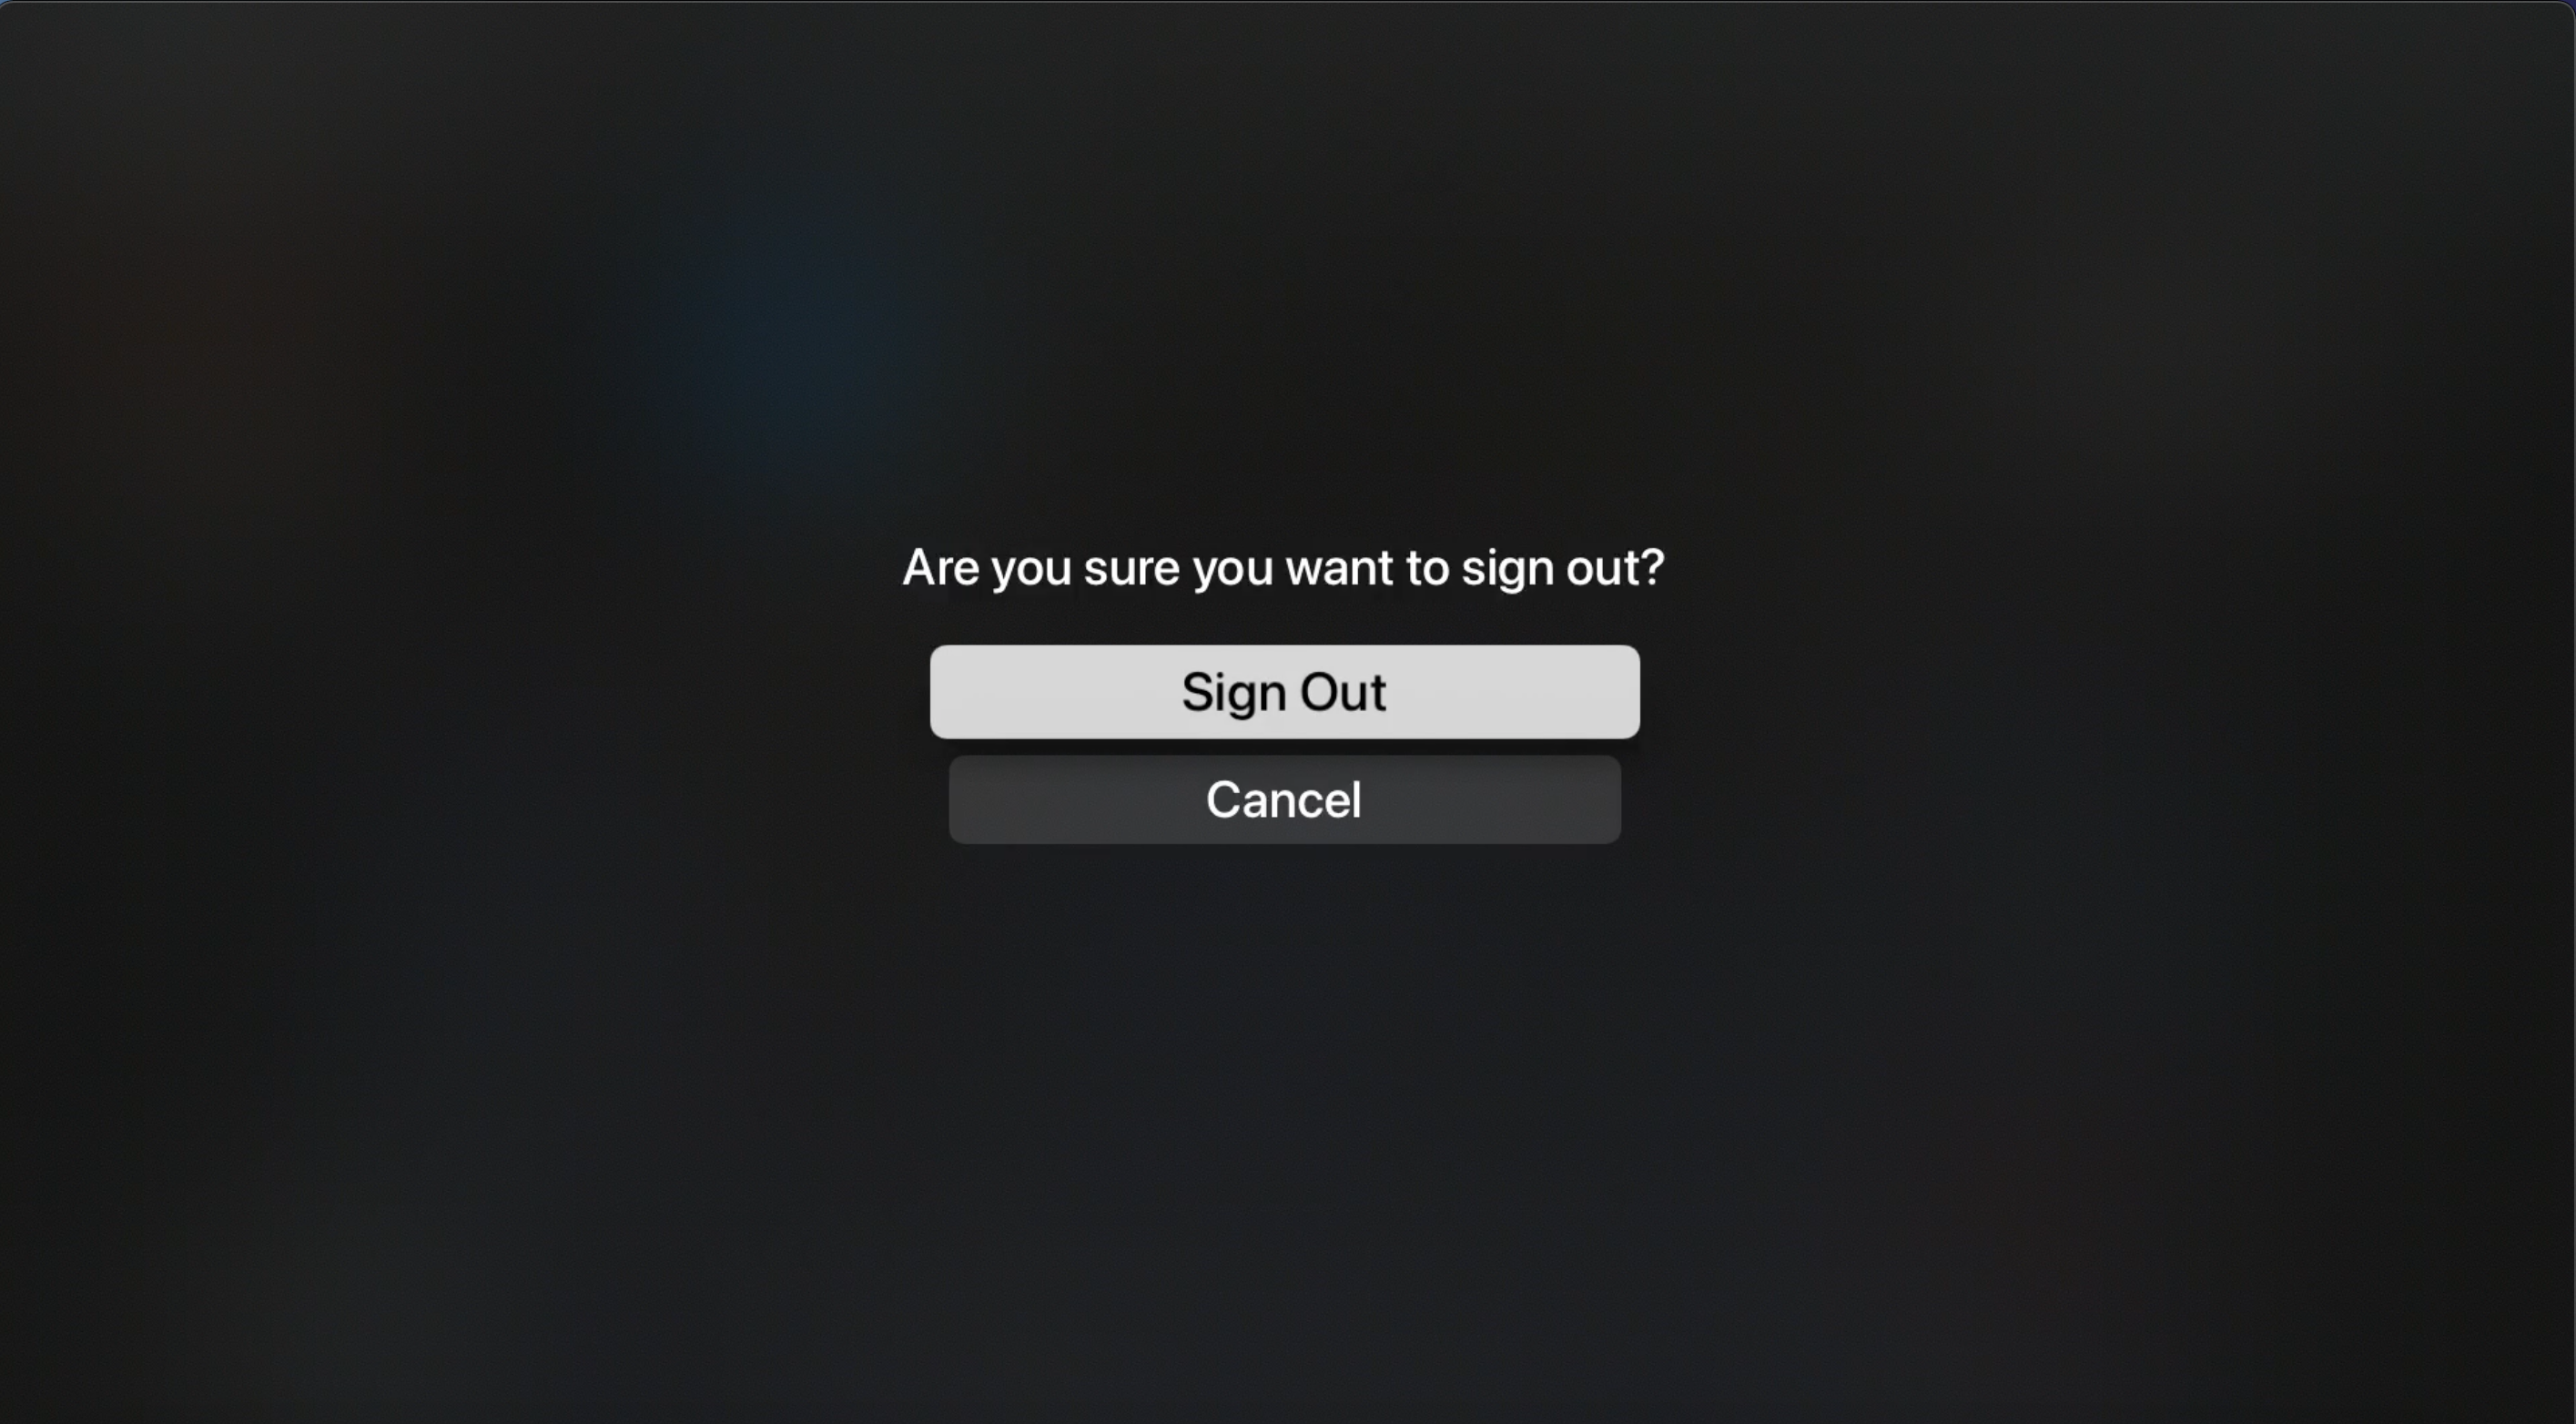 Sign out confirmation page of the FuboTV app on Apple TV with SIGN OUT button highlighted at center